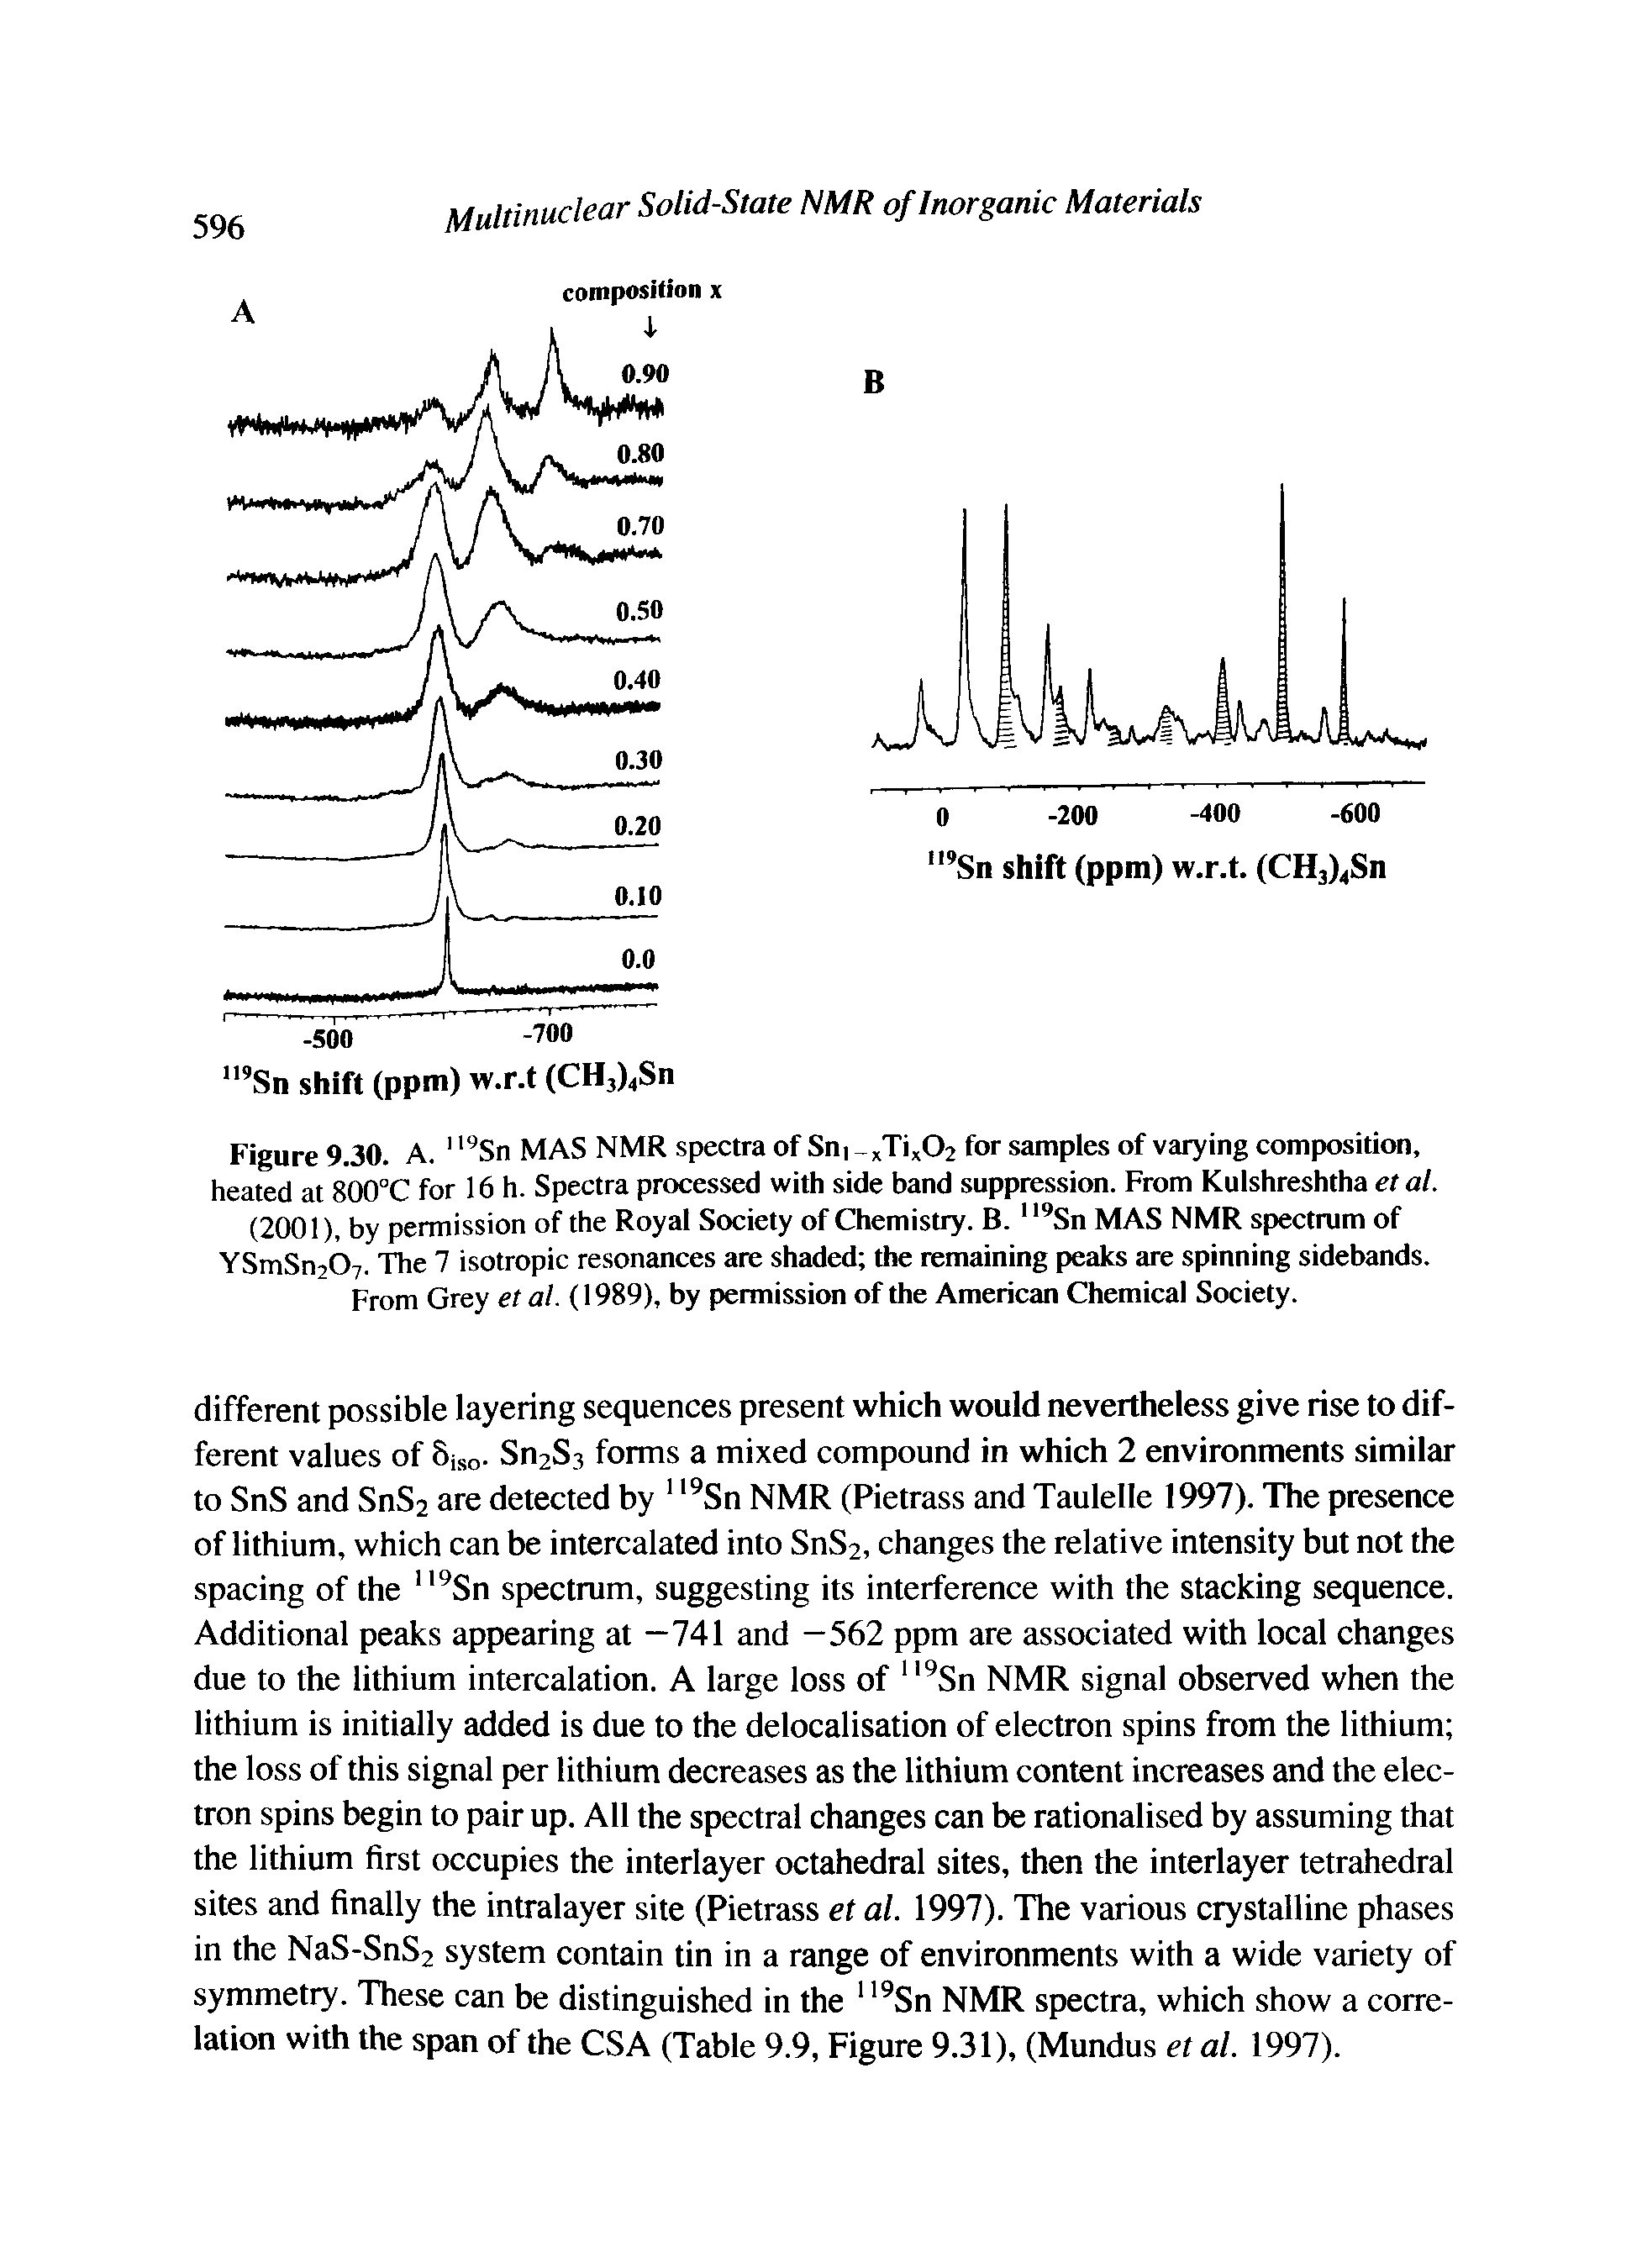 Figure 9.30. A. Sn MAS NMR spectra of Sri -xTi,02 for samples of varying composition, heated at 800°C for 16 h. Spectra processed with side band suppression. From Kulshreshtha et al.